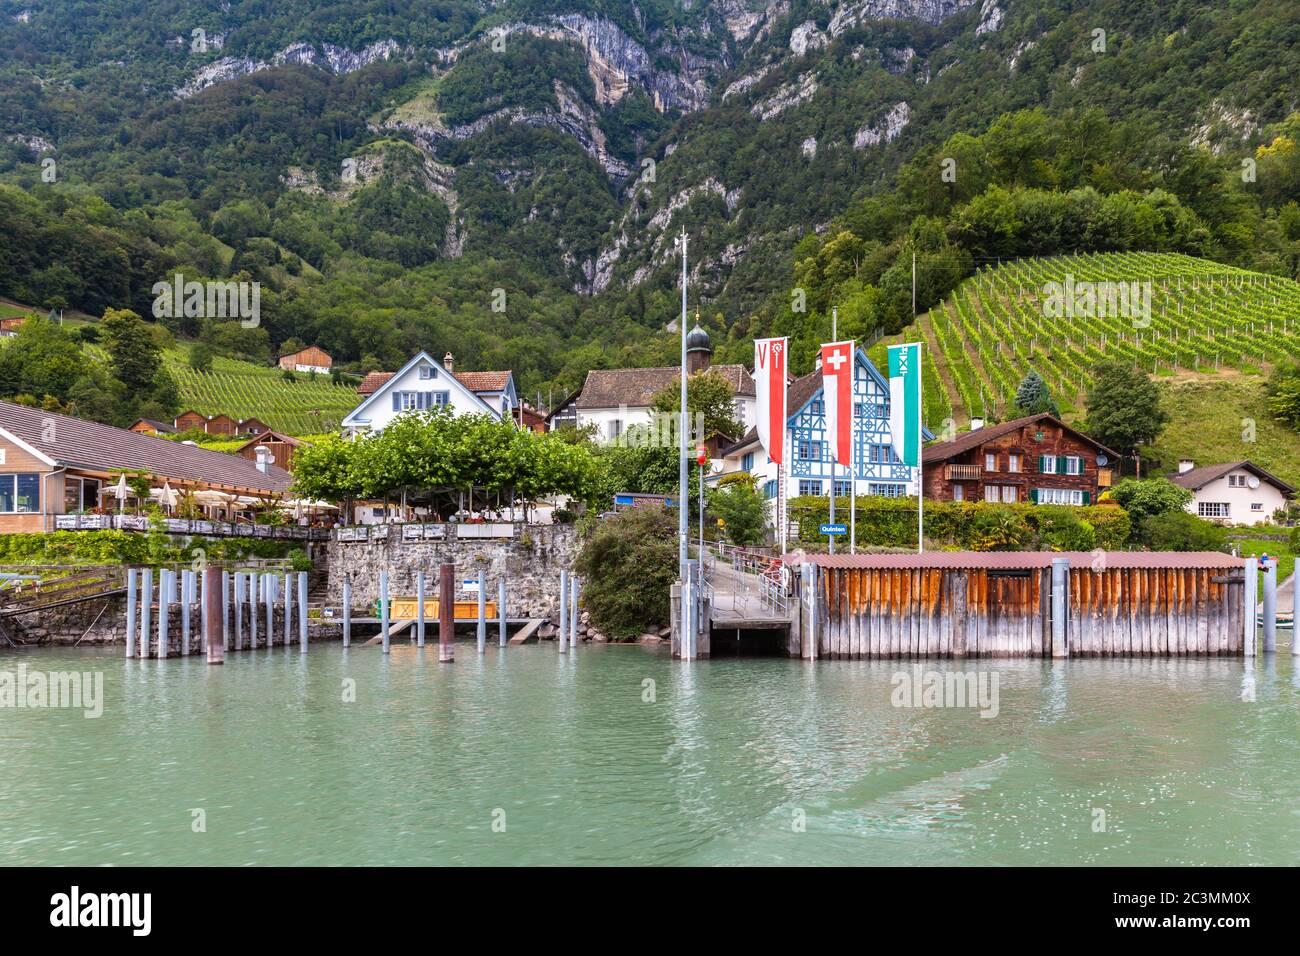 Beautiful view of the small town Quinten on the lake side of Walensee (Walen lake), Canton of St. Gallen, Switzerland Stock Photo